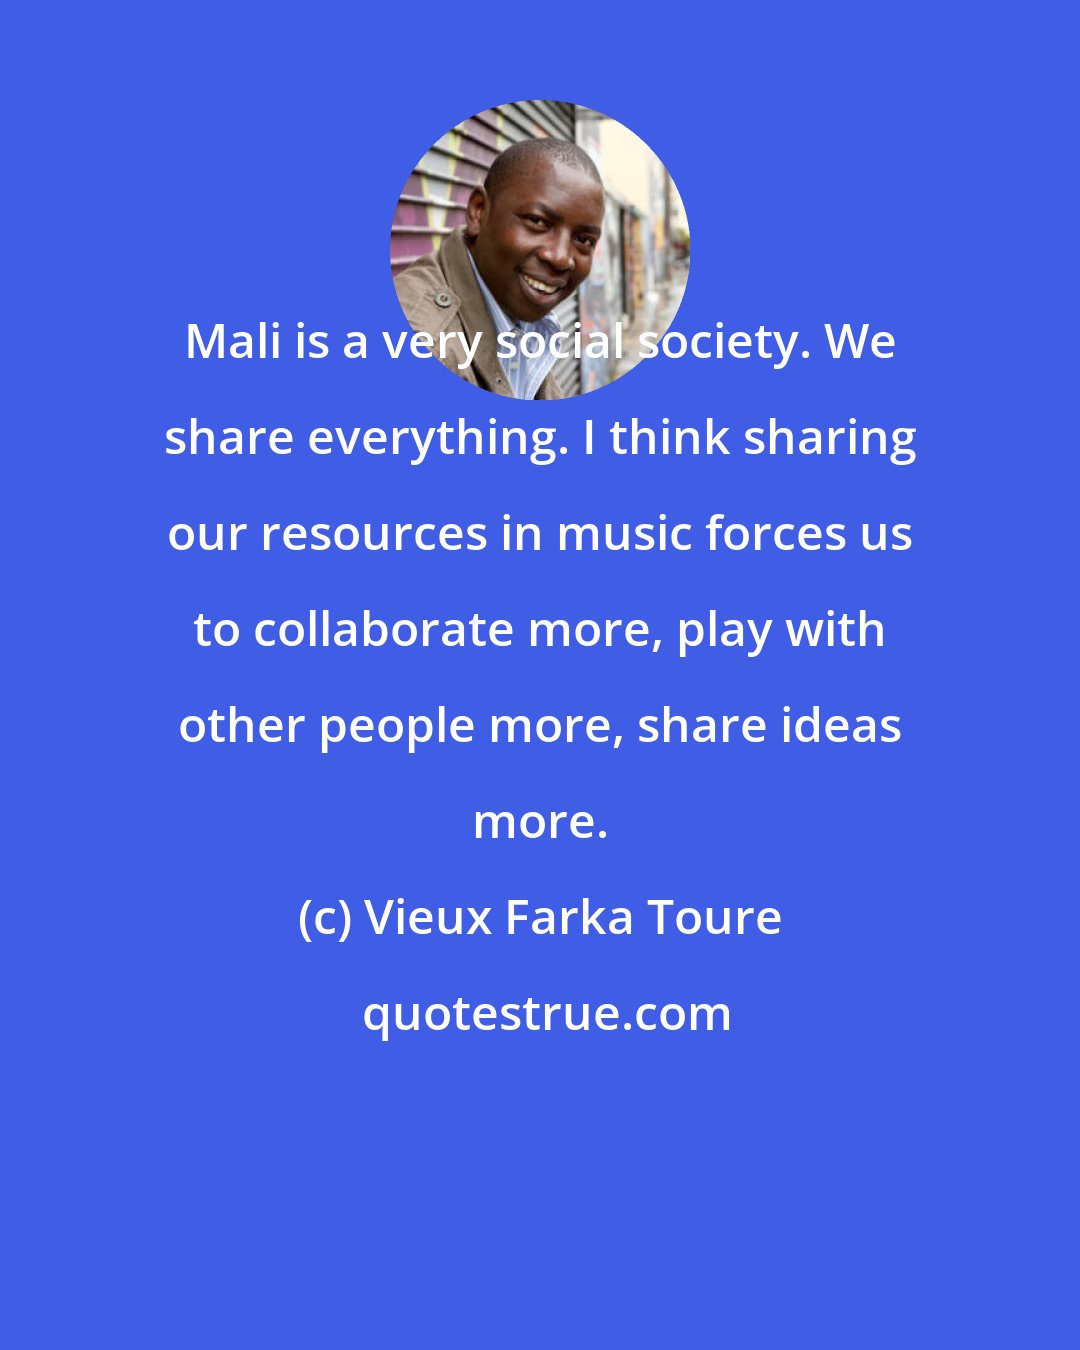 Vieux Farka Toure: Mali is a very social society. We share everything. I think sharing our resources in music forces us to collaborate more, play with other people more, share ideas more.